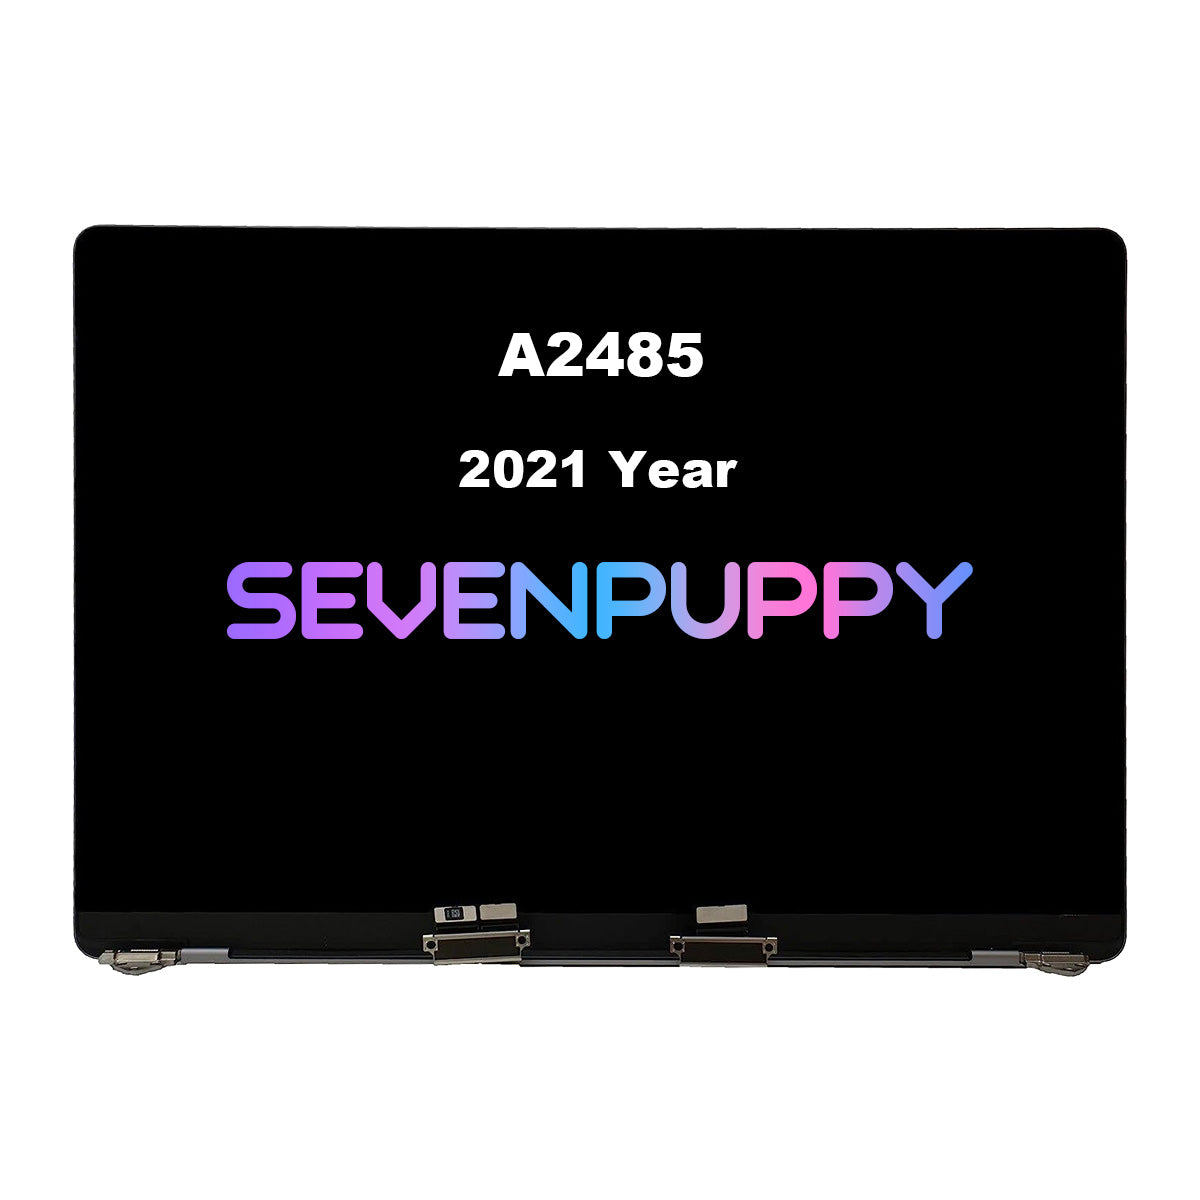 SEVEN PUPPY Brand NEW For MacBook Pro 16“ M1 M2 A2485 2021 Year Retina Full LCD Display Screen Assembly Replacement